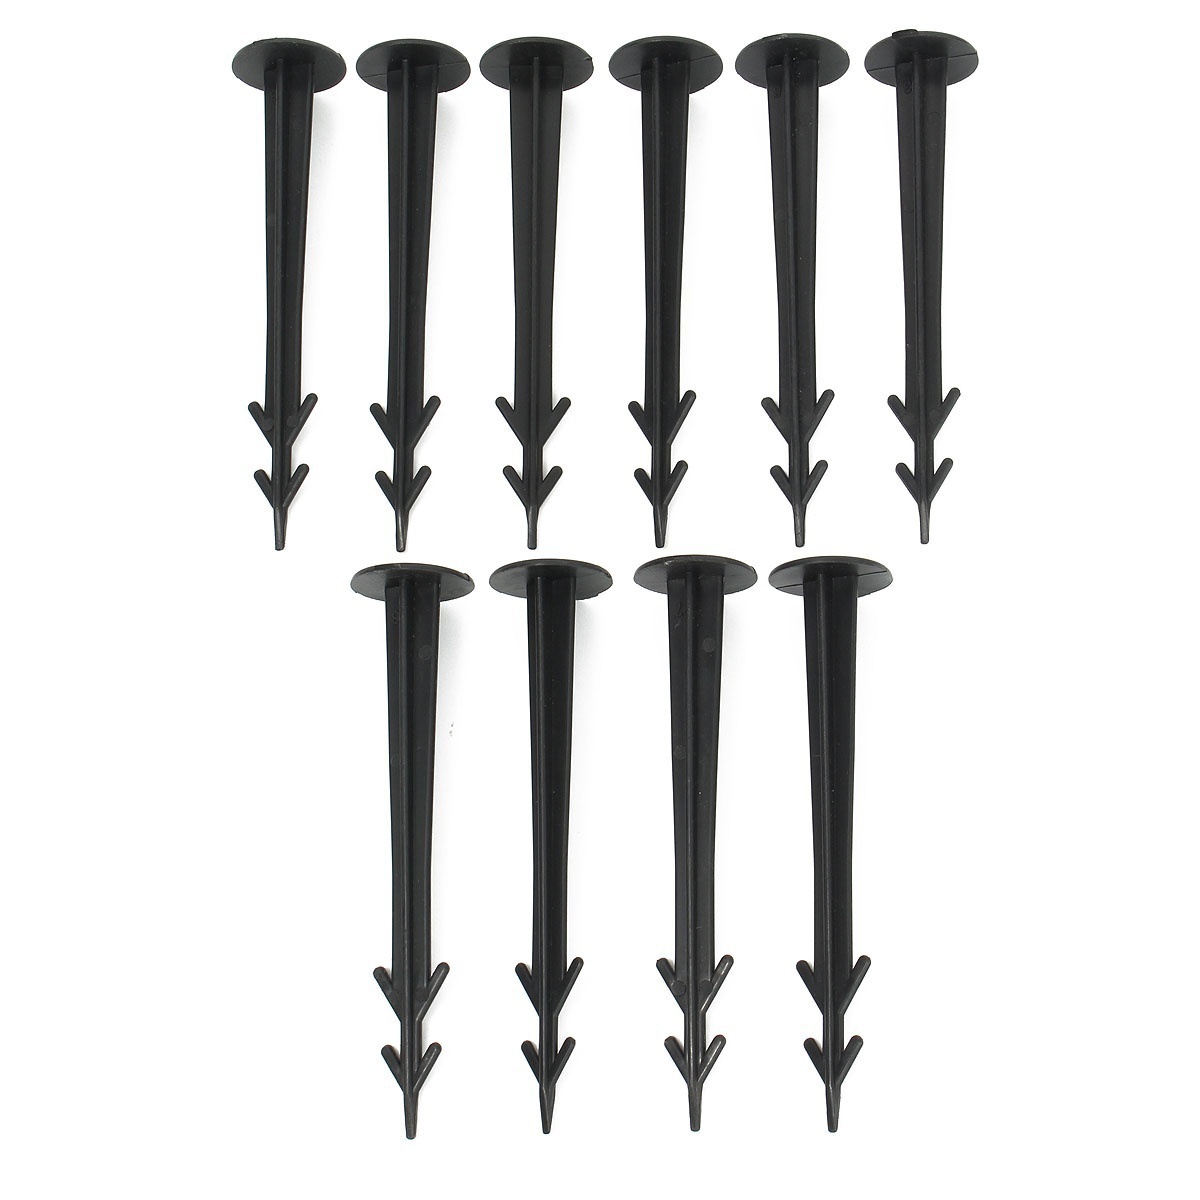 Ground Anchor SCREW IN PEG HEAVY DUTY FABRIC MEMBRANE STAKES FIXING 1 x 1pc Kit 